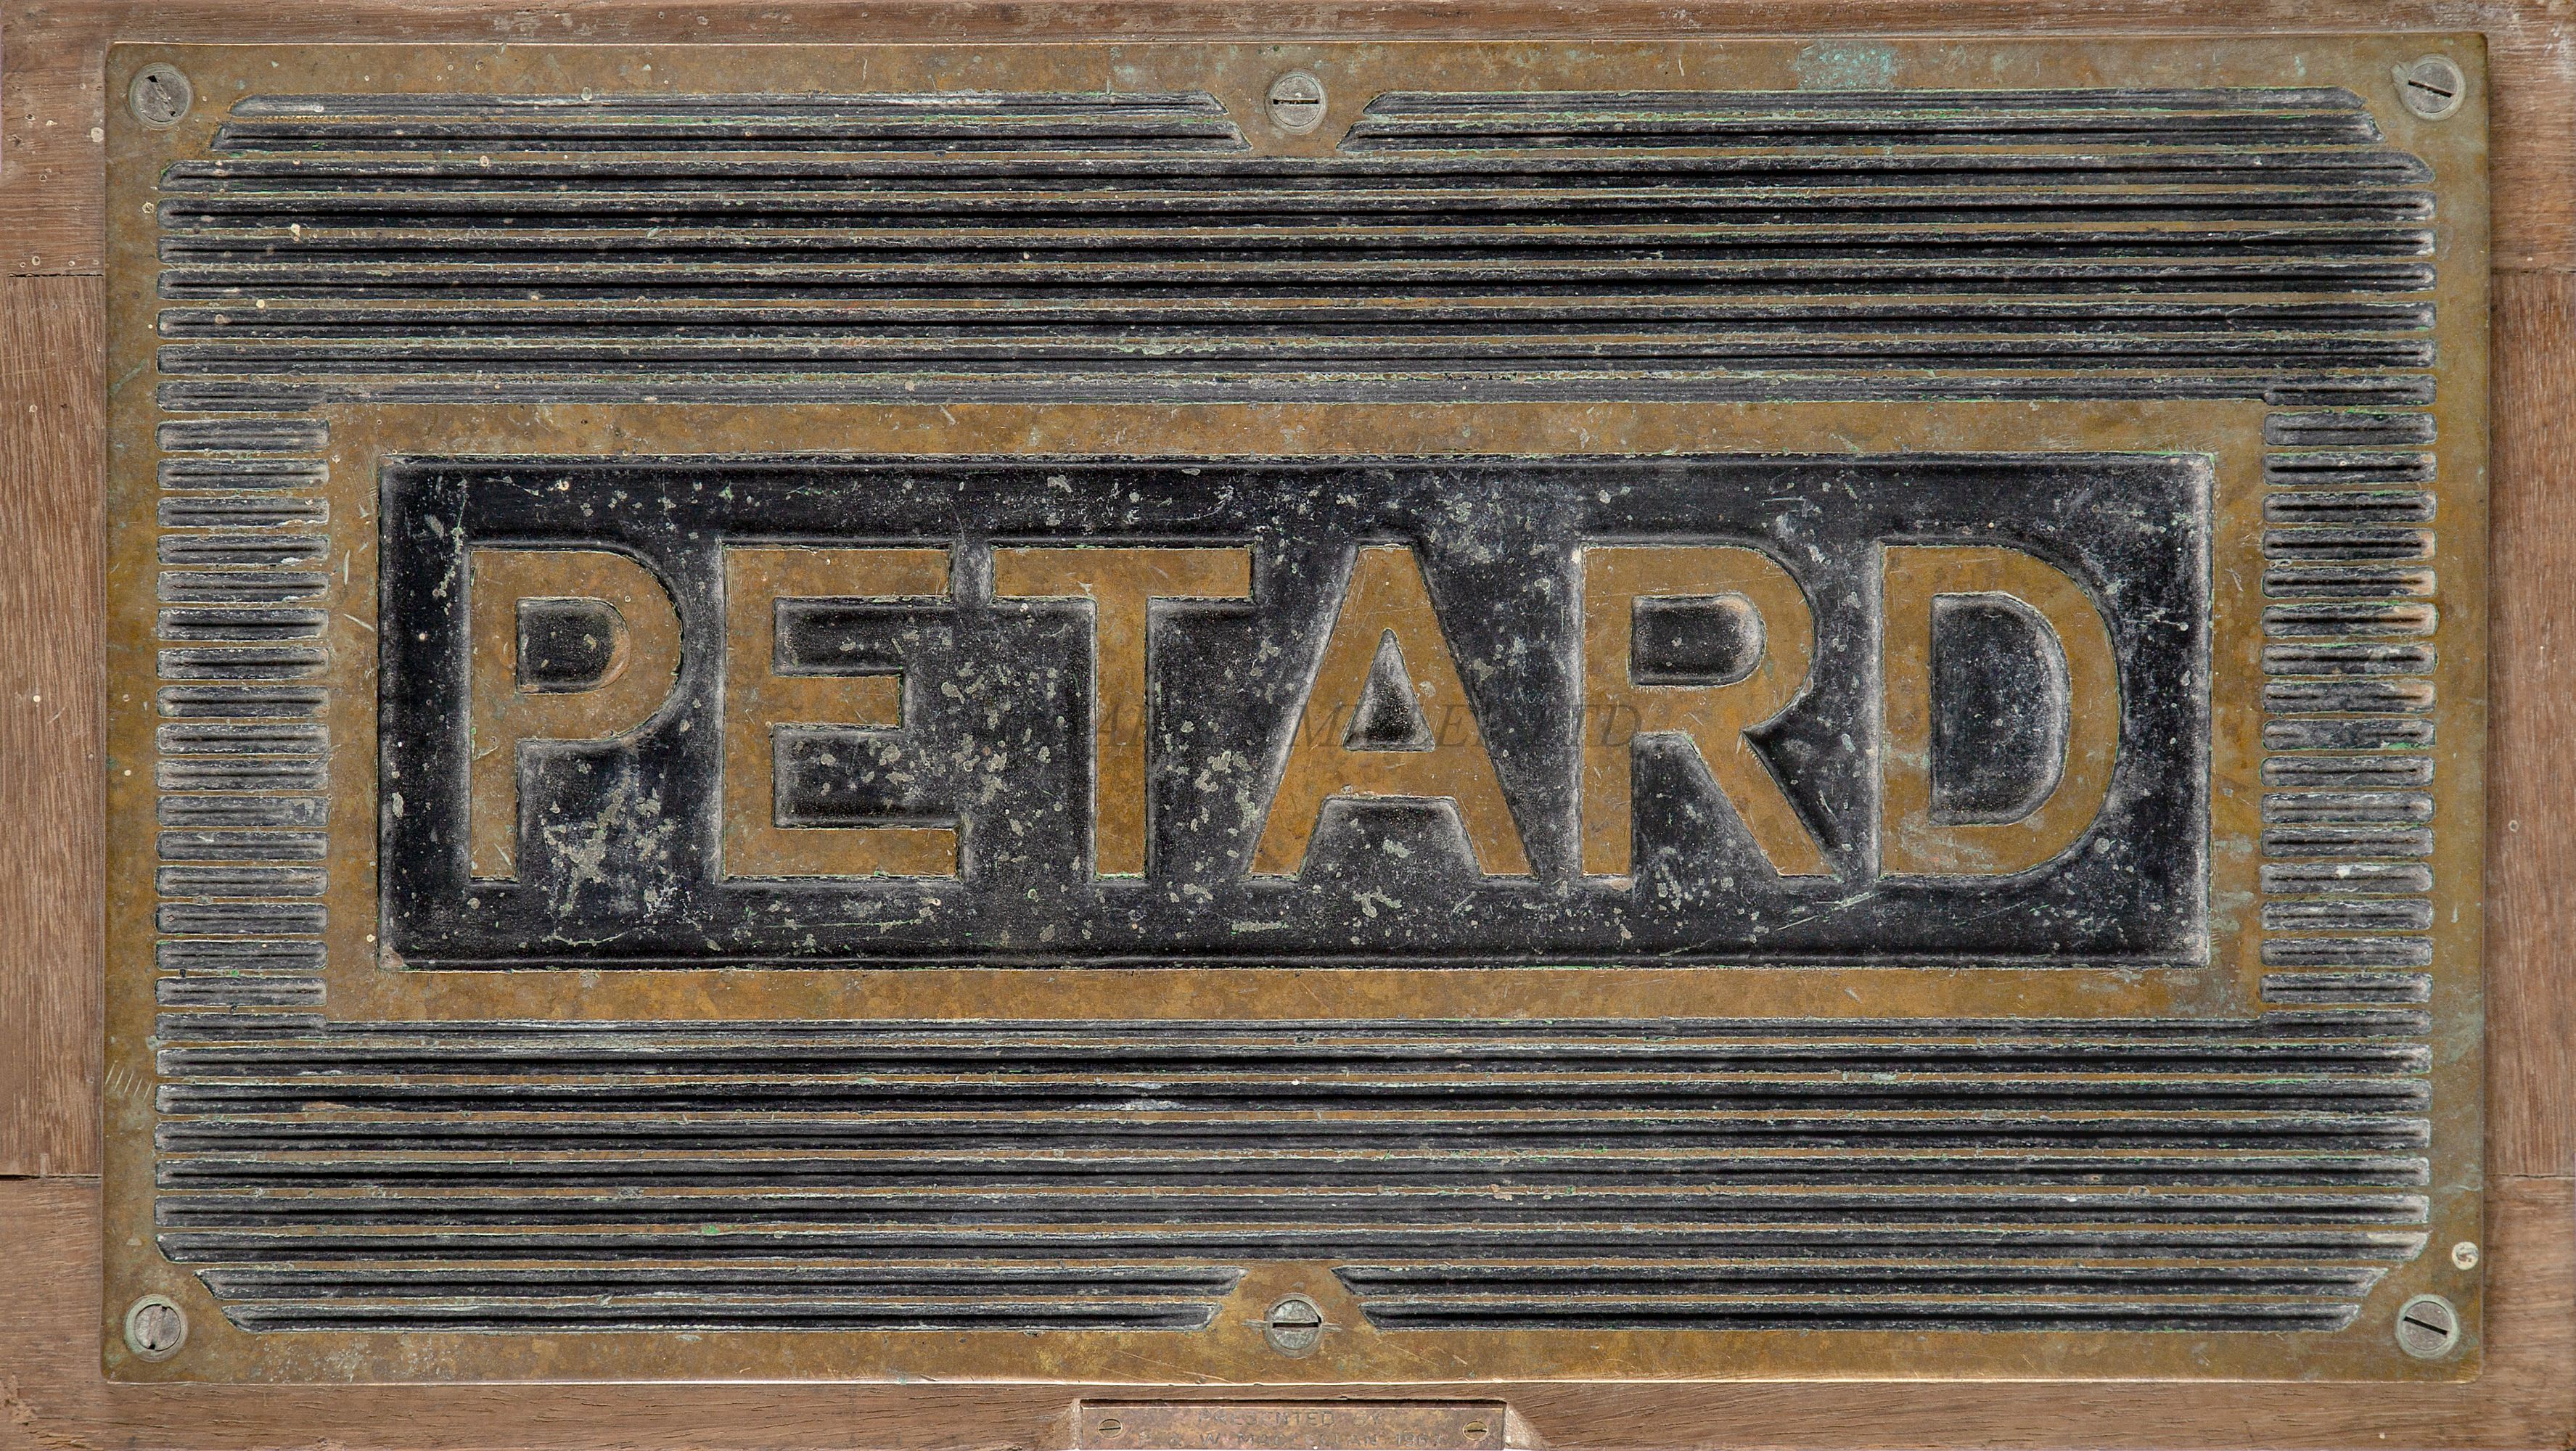 A TREAD PLATE FROM H.M. DESTROYER 'PETARD', WHICH ASSISTED IN THE SINKING OF U559 AND THE RECOVERY